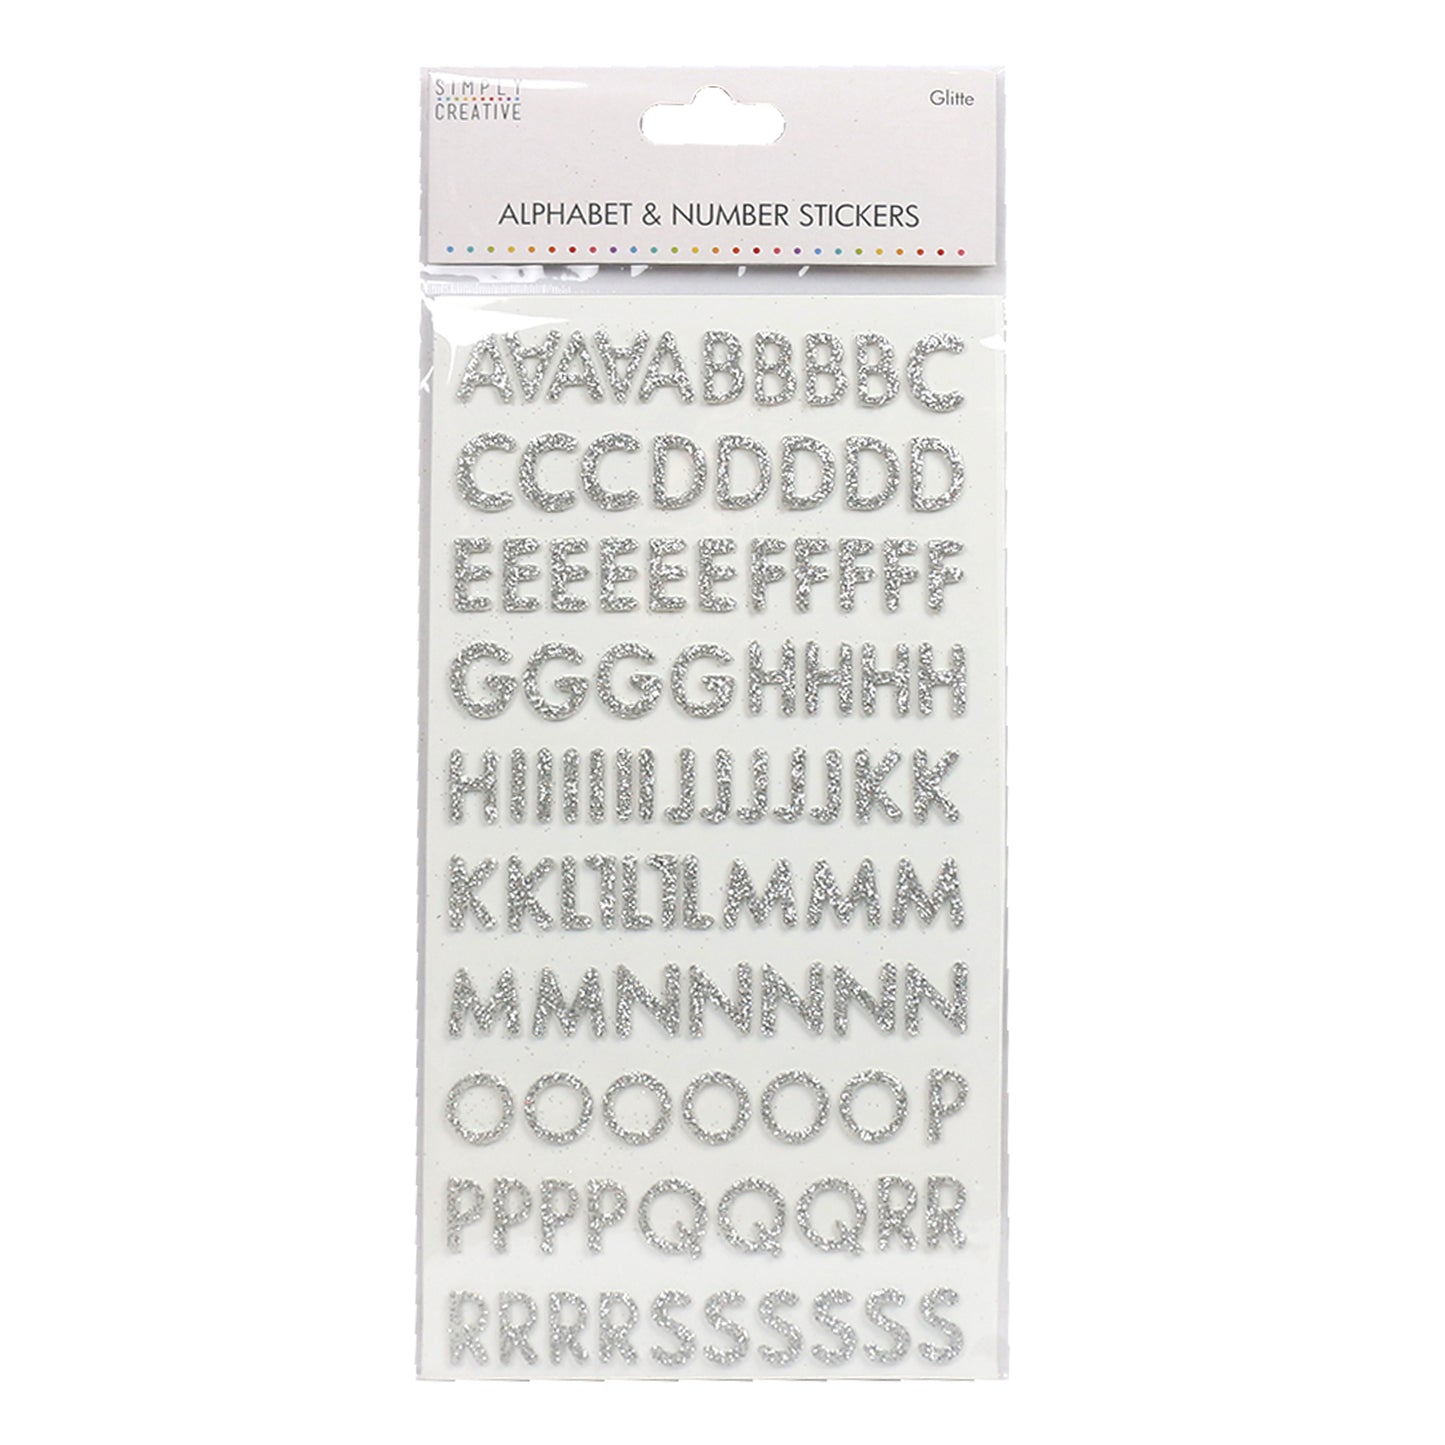 Simply Creative Alphabet & Number Stickers - Skinny Glitter Silver